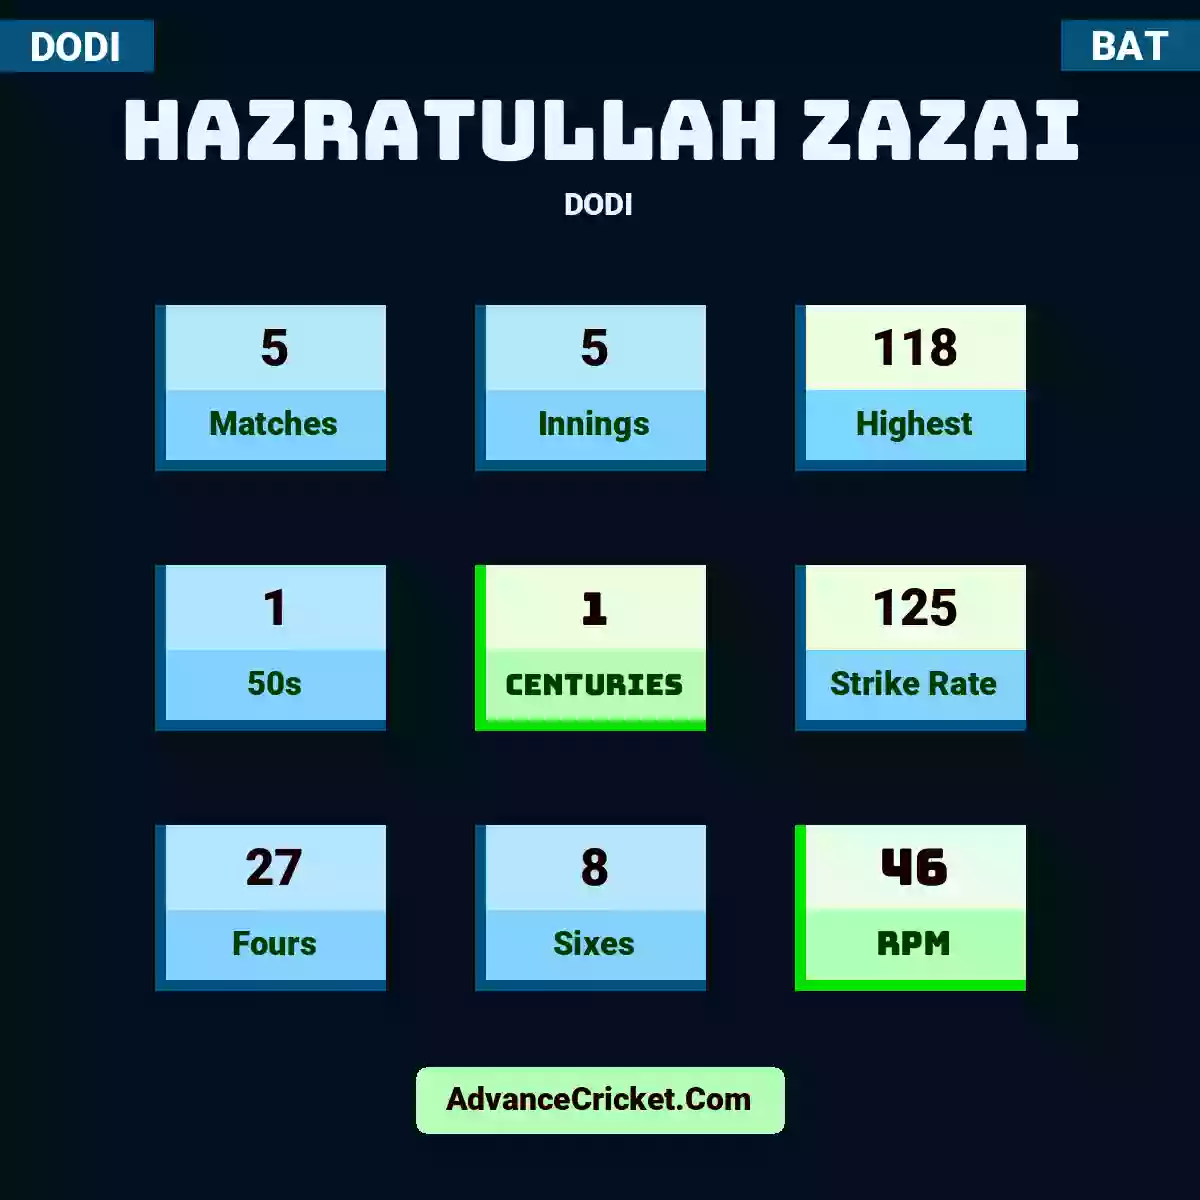 Hazratullah Zazai DODI , Hazratullah Zazai played 5 matches, scored 118 runs as highest, 1 half-centuries, and 1 centuries, with a strike rate of 125. H.Zazai hit 27 fours and 8 sixes, with an RPM of 46.